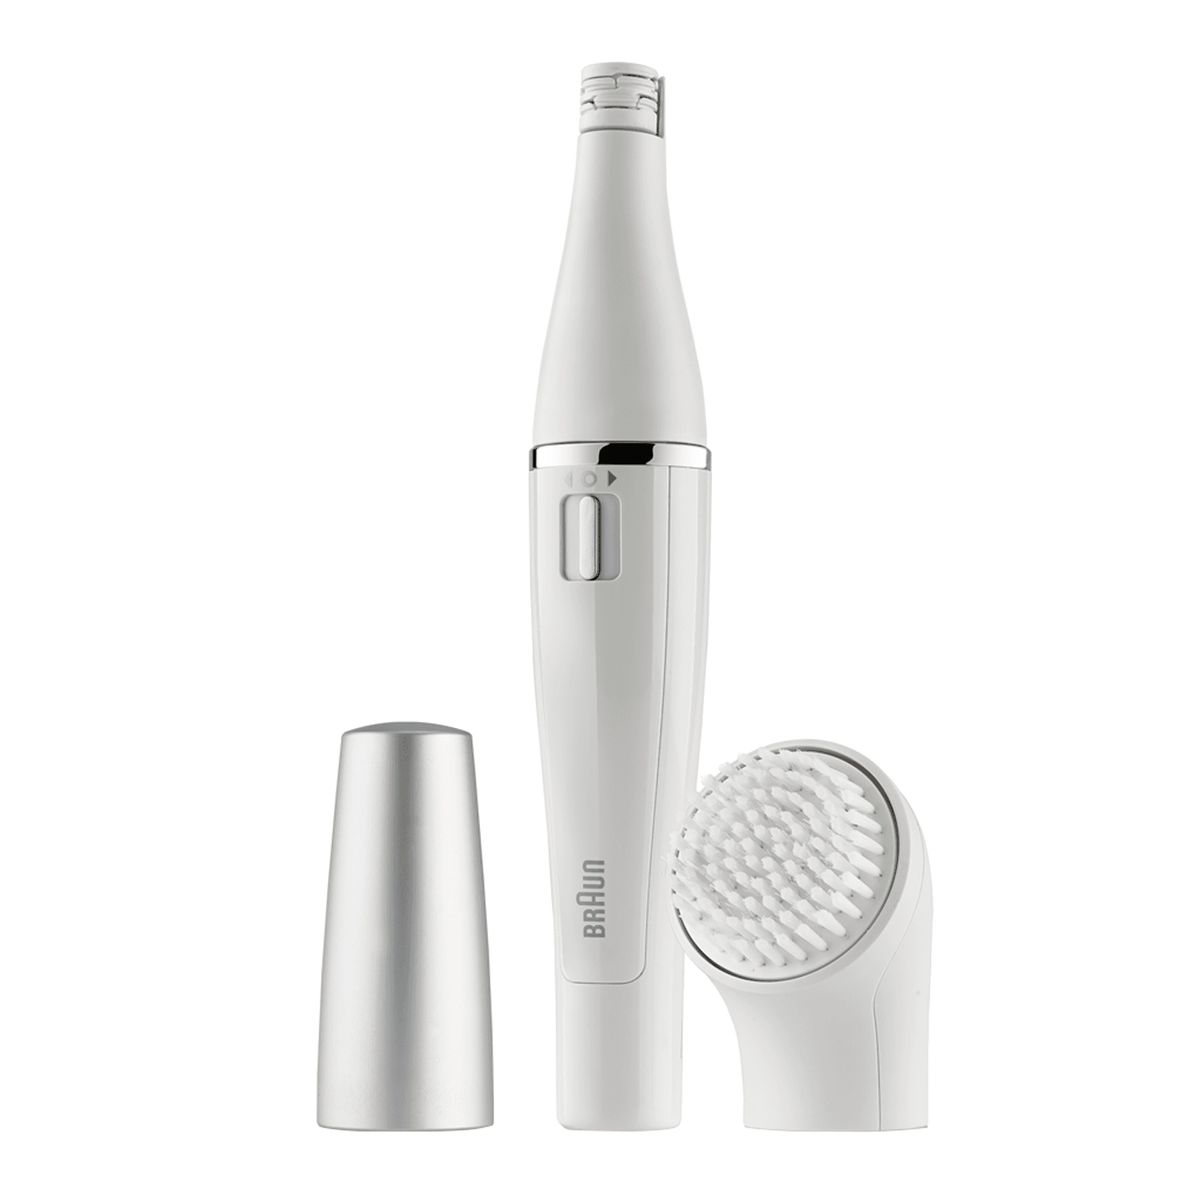 Braun FaceSpa facial epilator ladies, facial cleansing brush, hair removal and cleaning, 810, white/silver